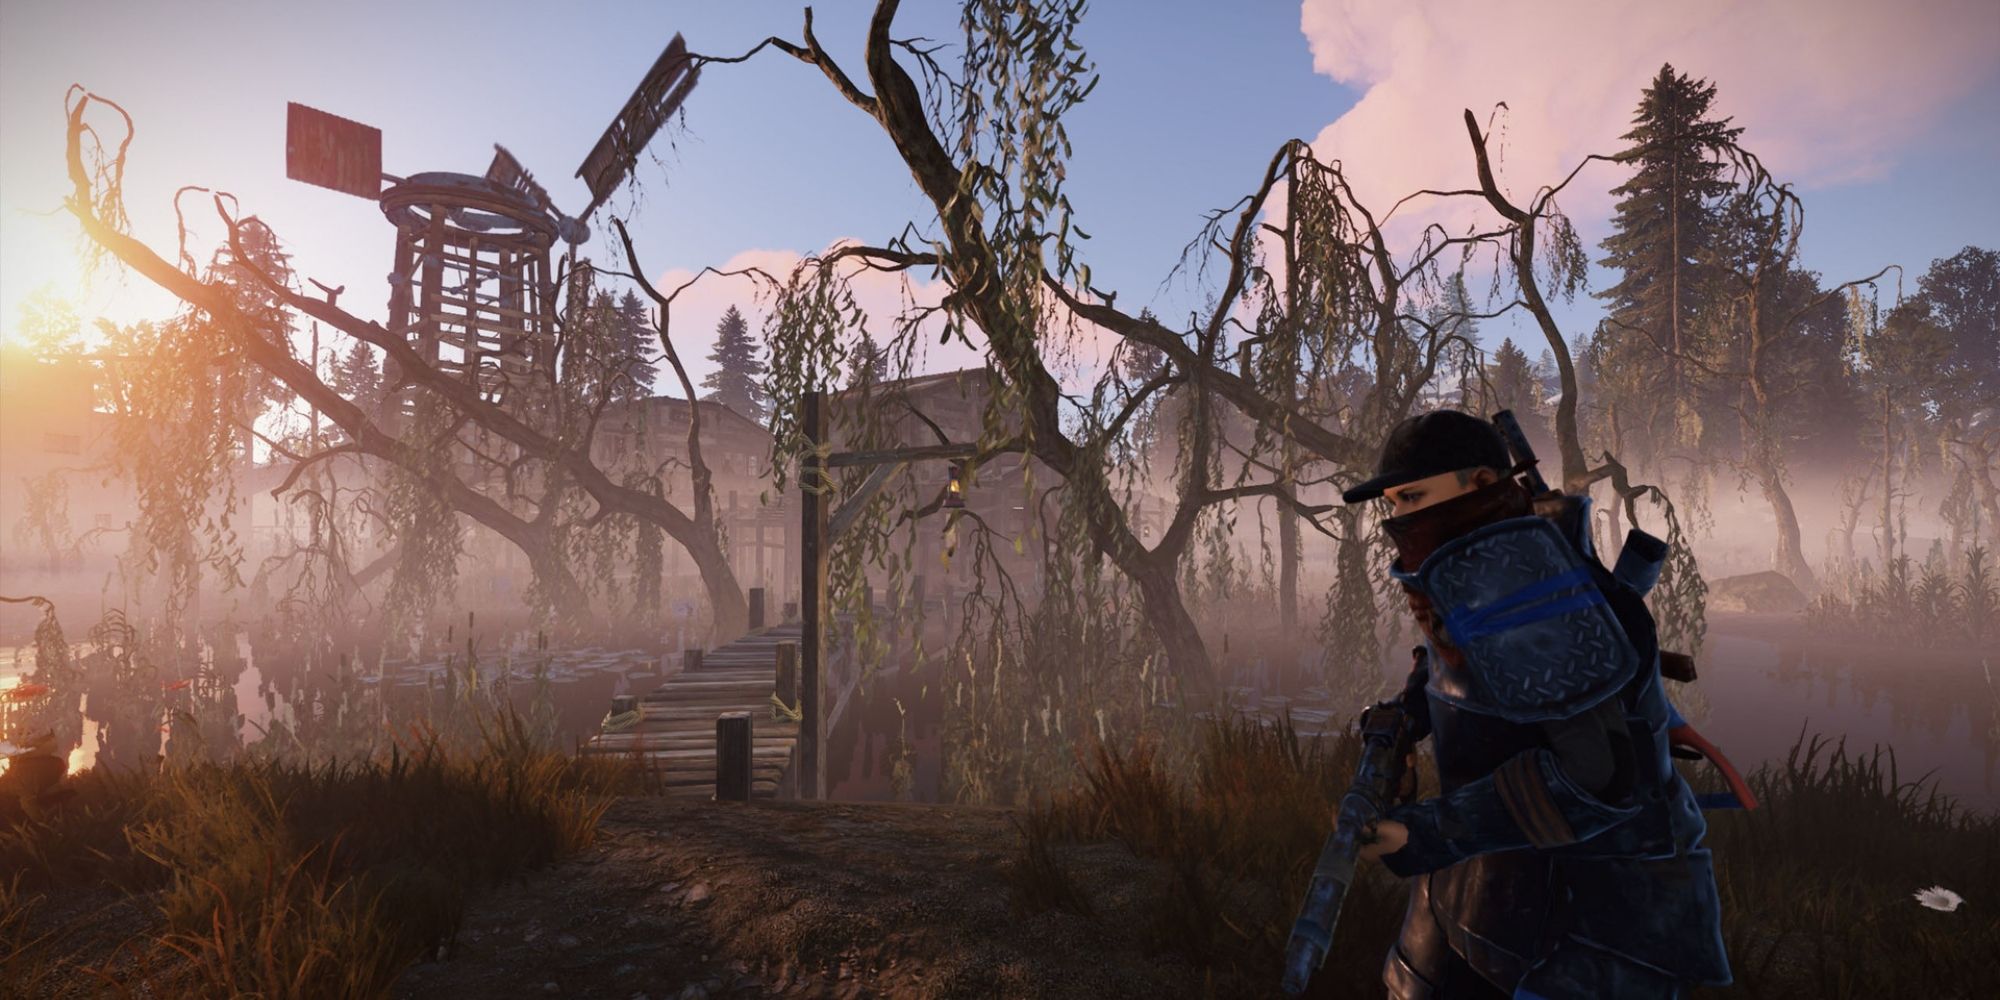 A player is armed in the middle of a desolate swamp-like area with a broken windmill.